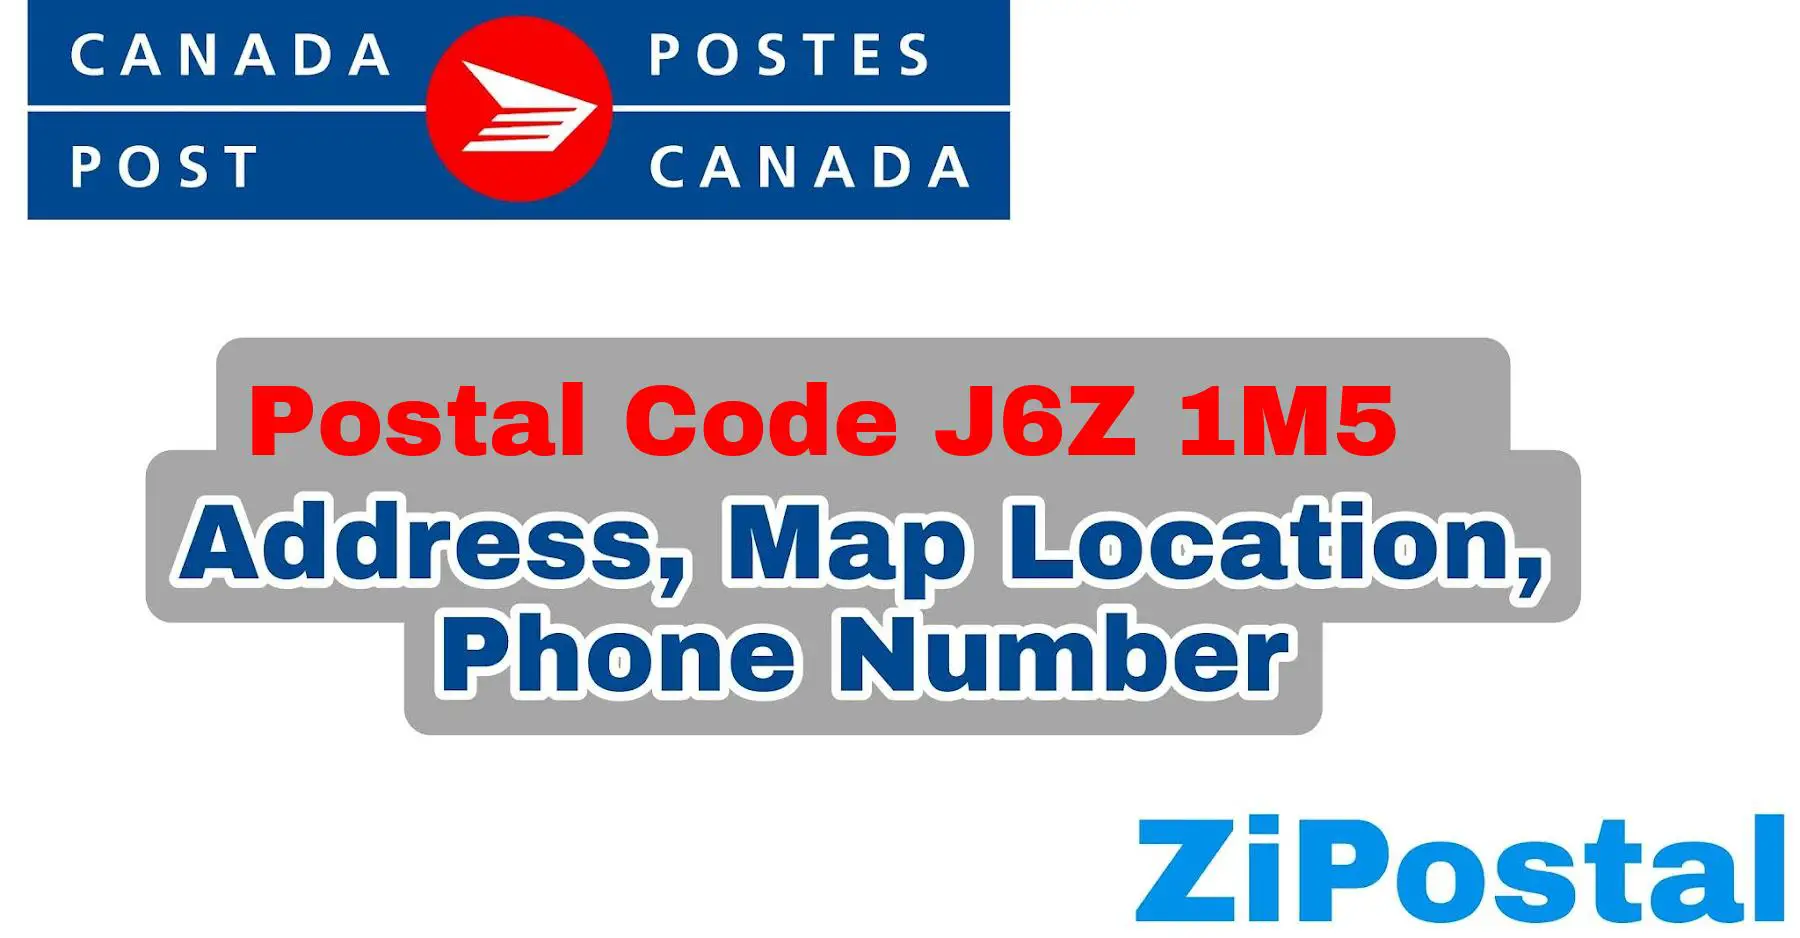 Postal Code J6Z 1M5 Address Map Location and Phone Number